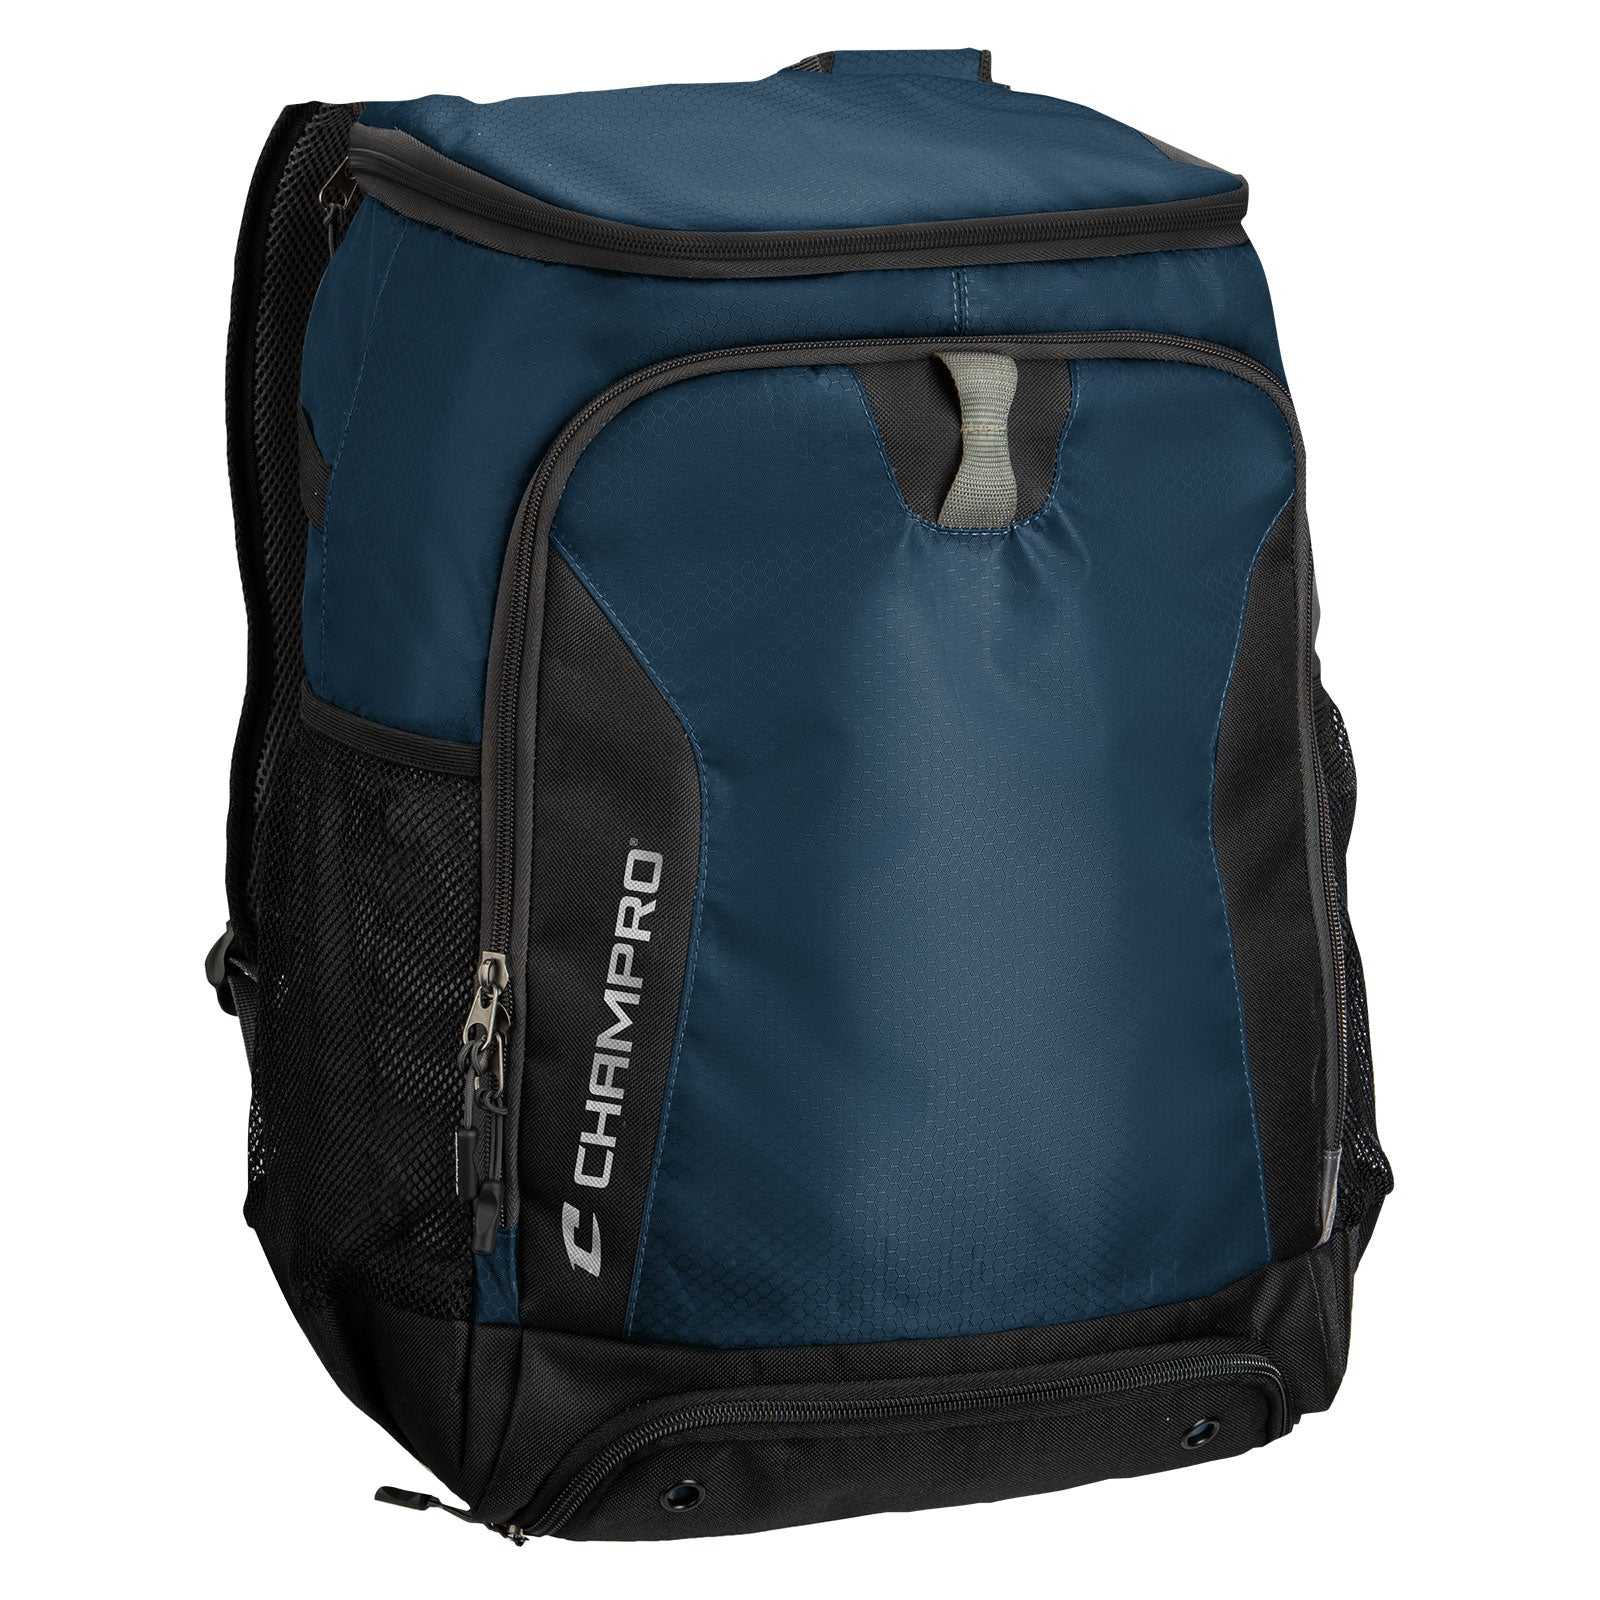 Champro E81 FortreShort Sleeve 2 Backpack - Navy - HIT A Double